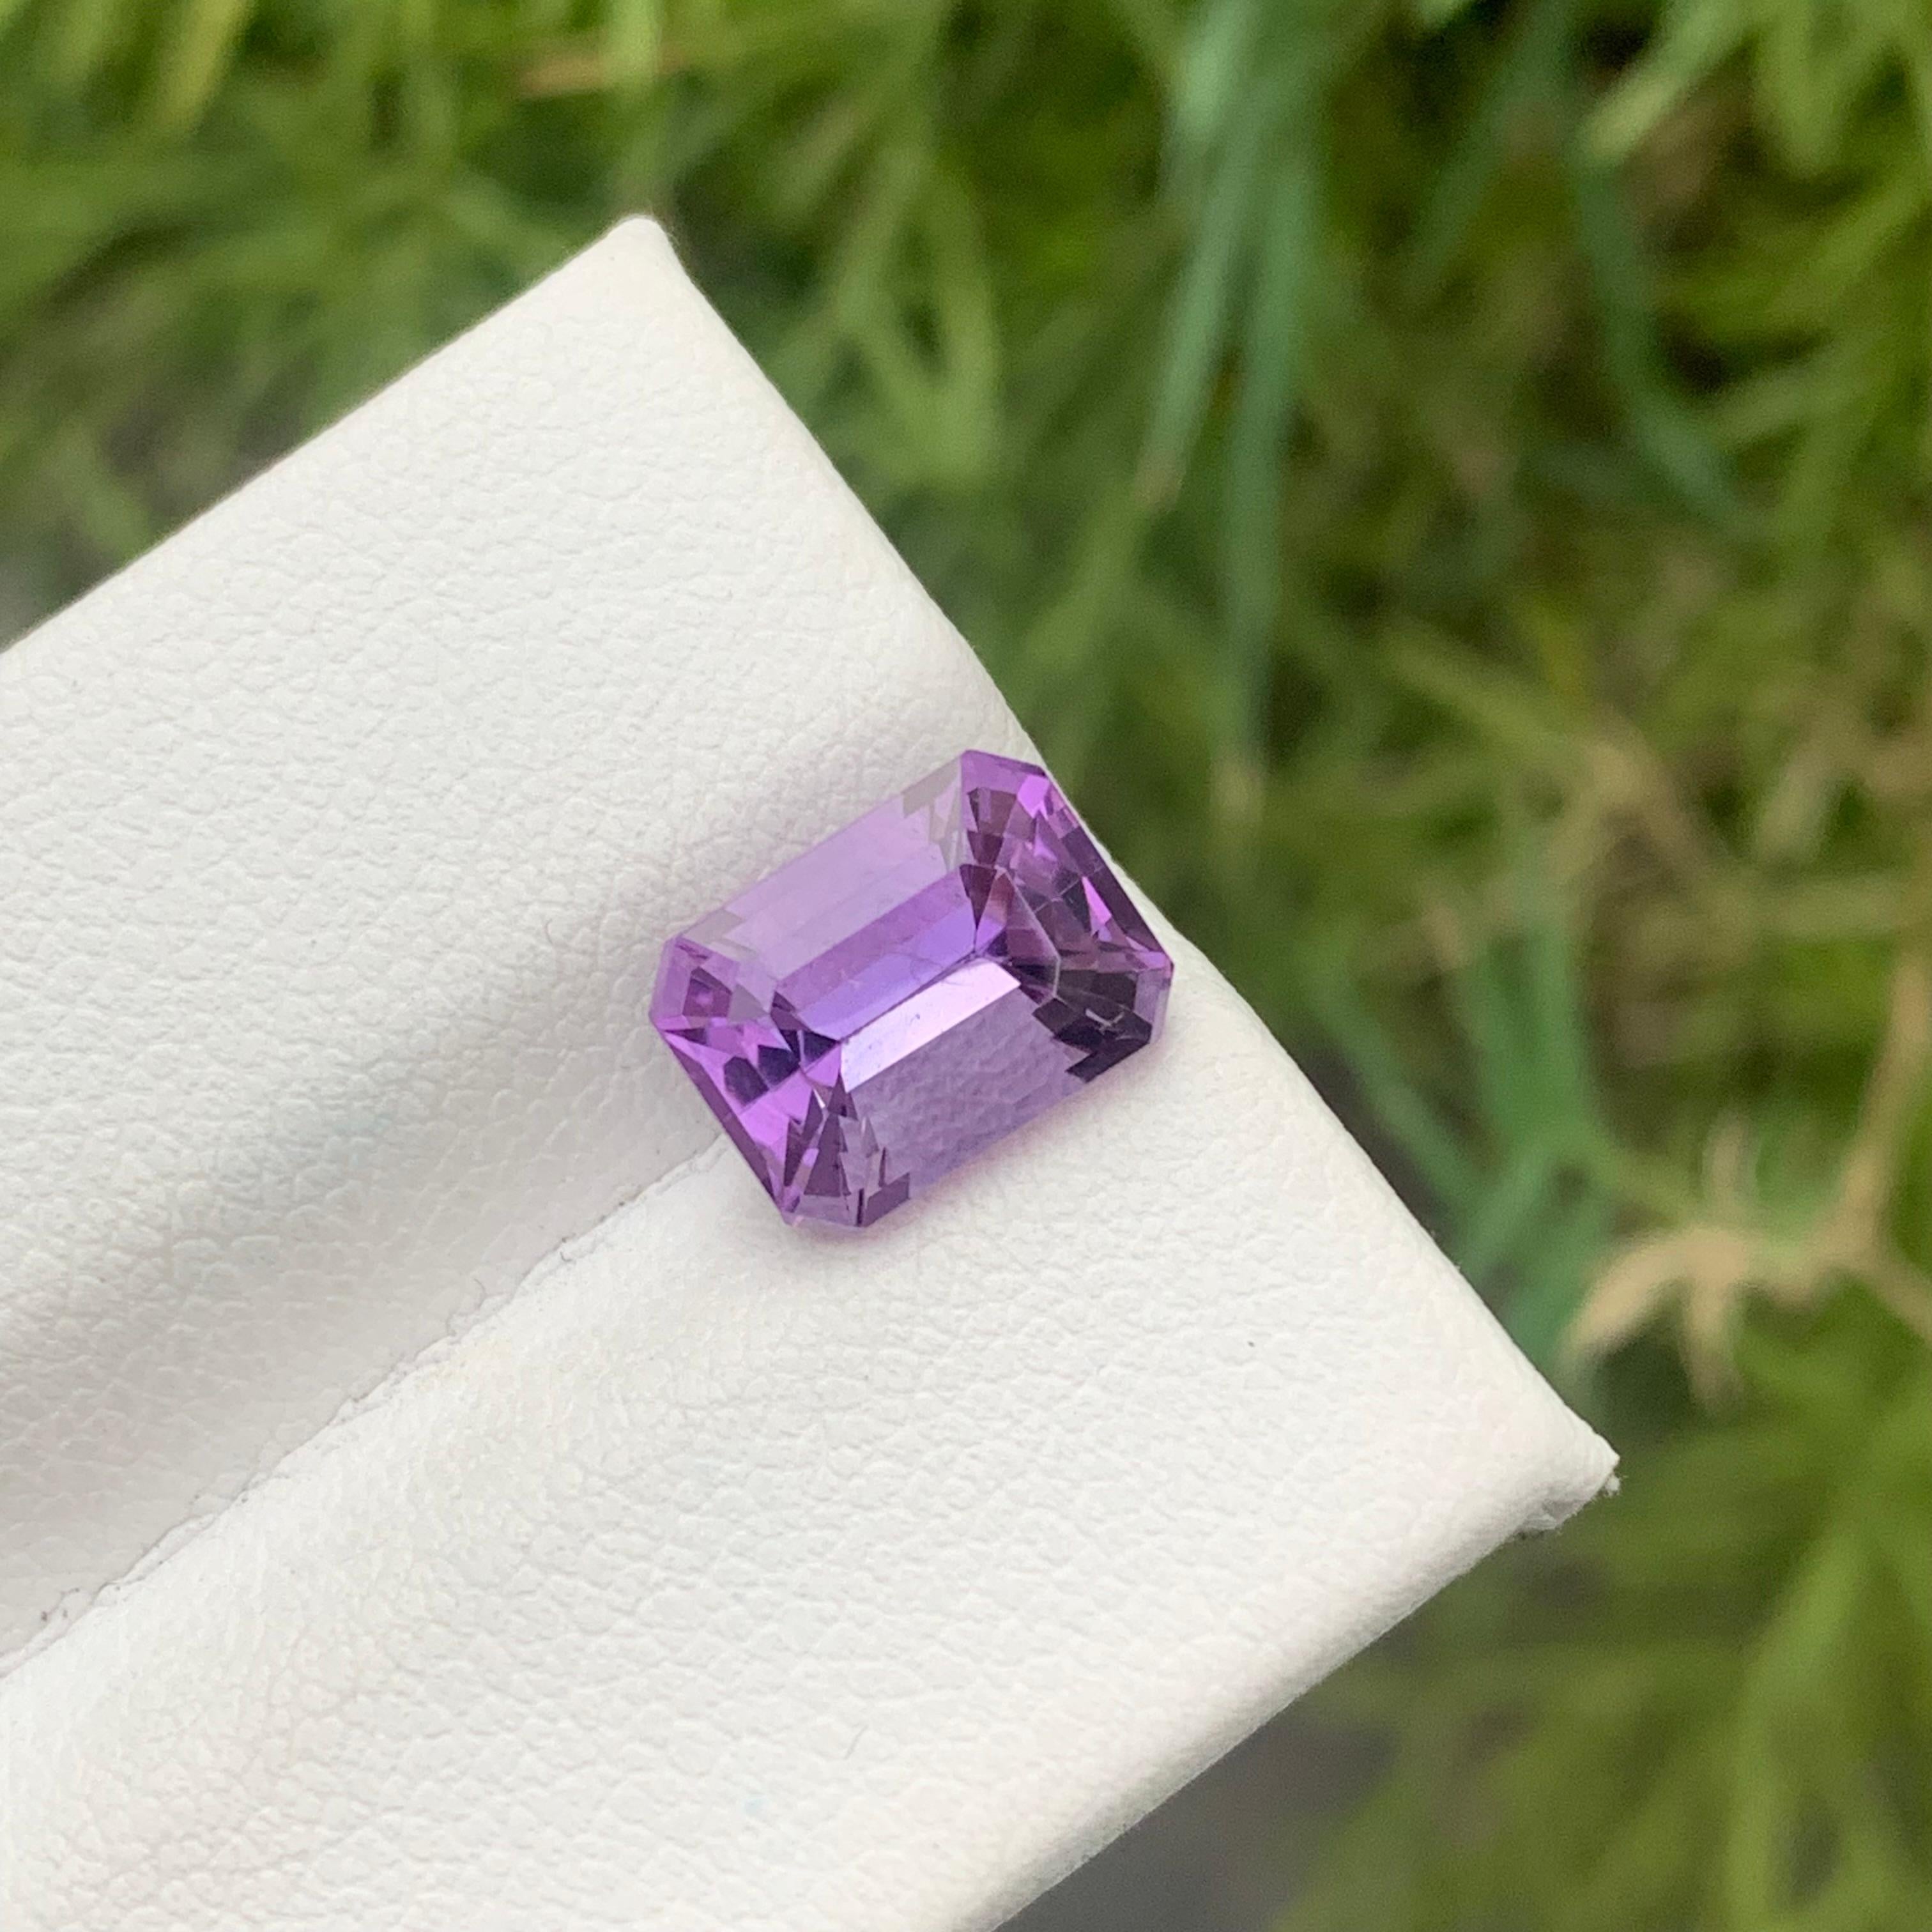 Stunning 3 Carat Natural Emerald Cut Faceted Amethyst Gemstone from Brazil Mine For Sale 1